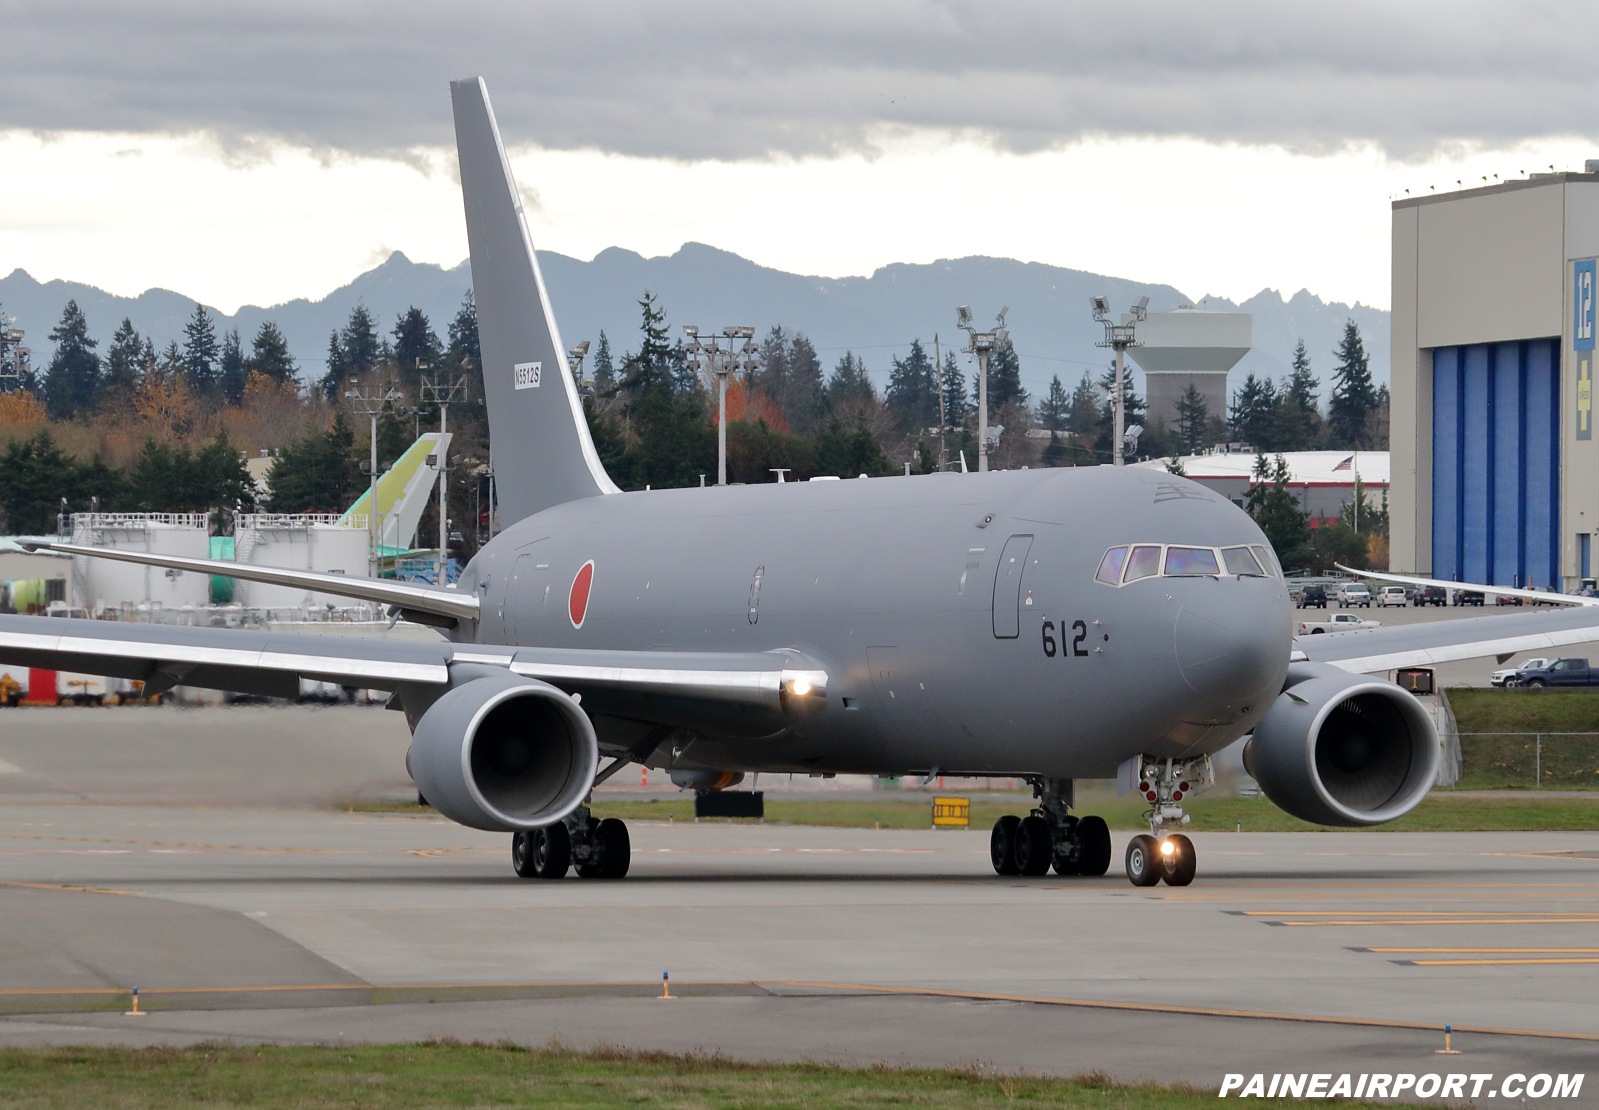 JASDF KC-46A 14-3612 at KPAE Paine Field